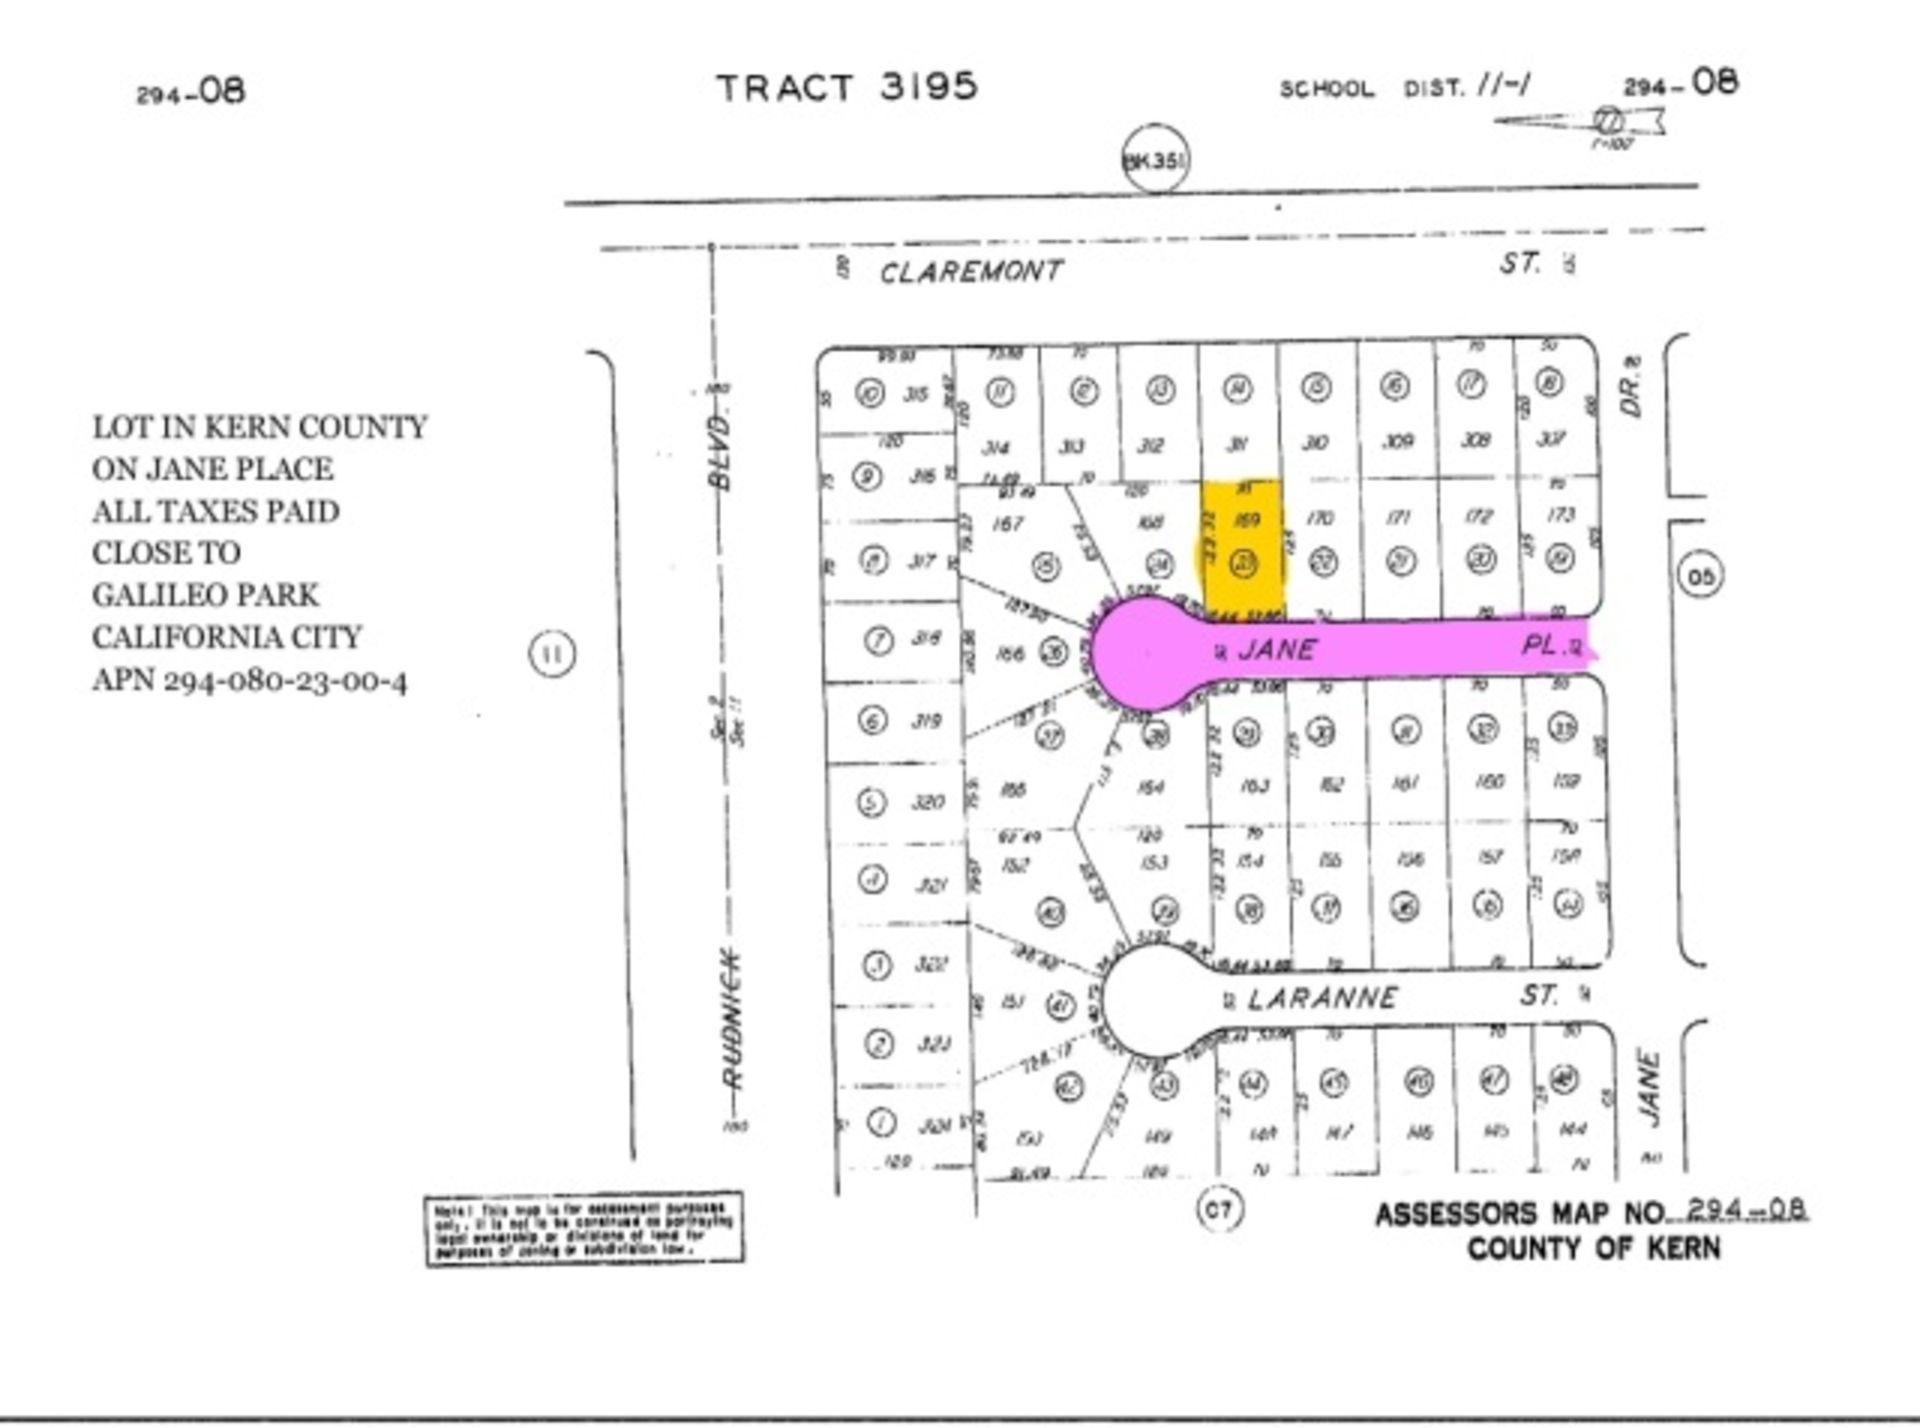 Lot In Kern County California, Located On Jane Place, Close To Galileo Park California City, Legal - Image 4 of 5